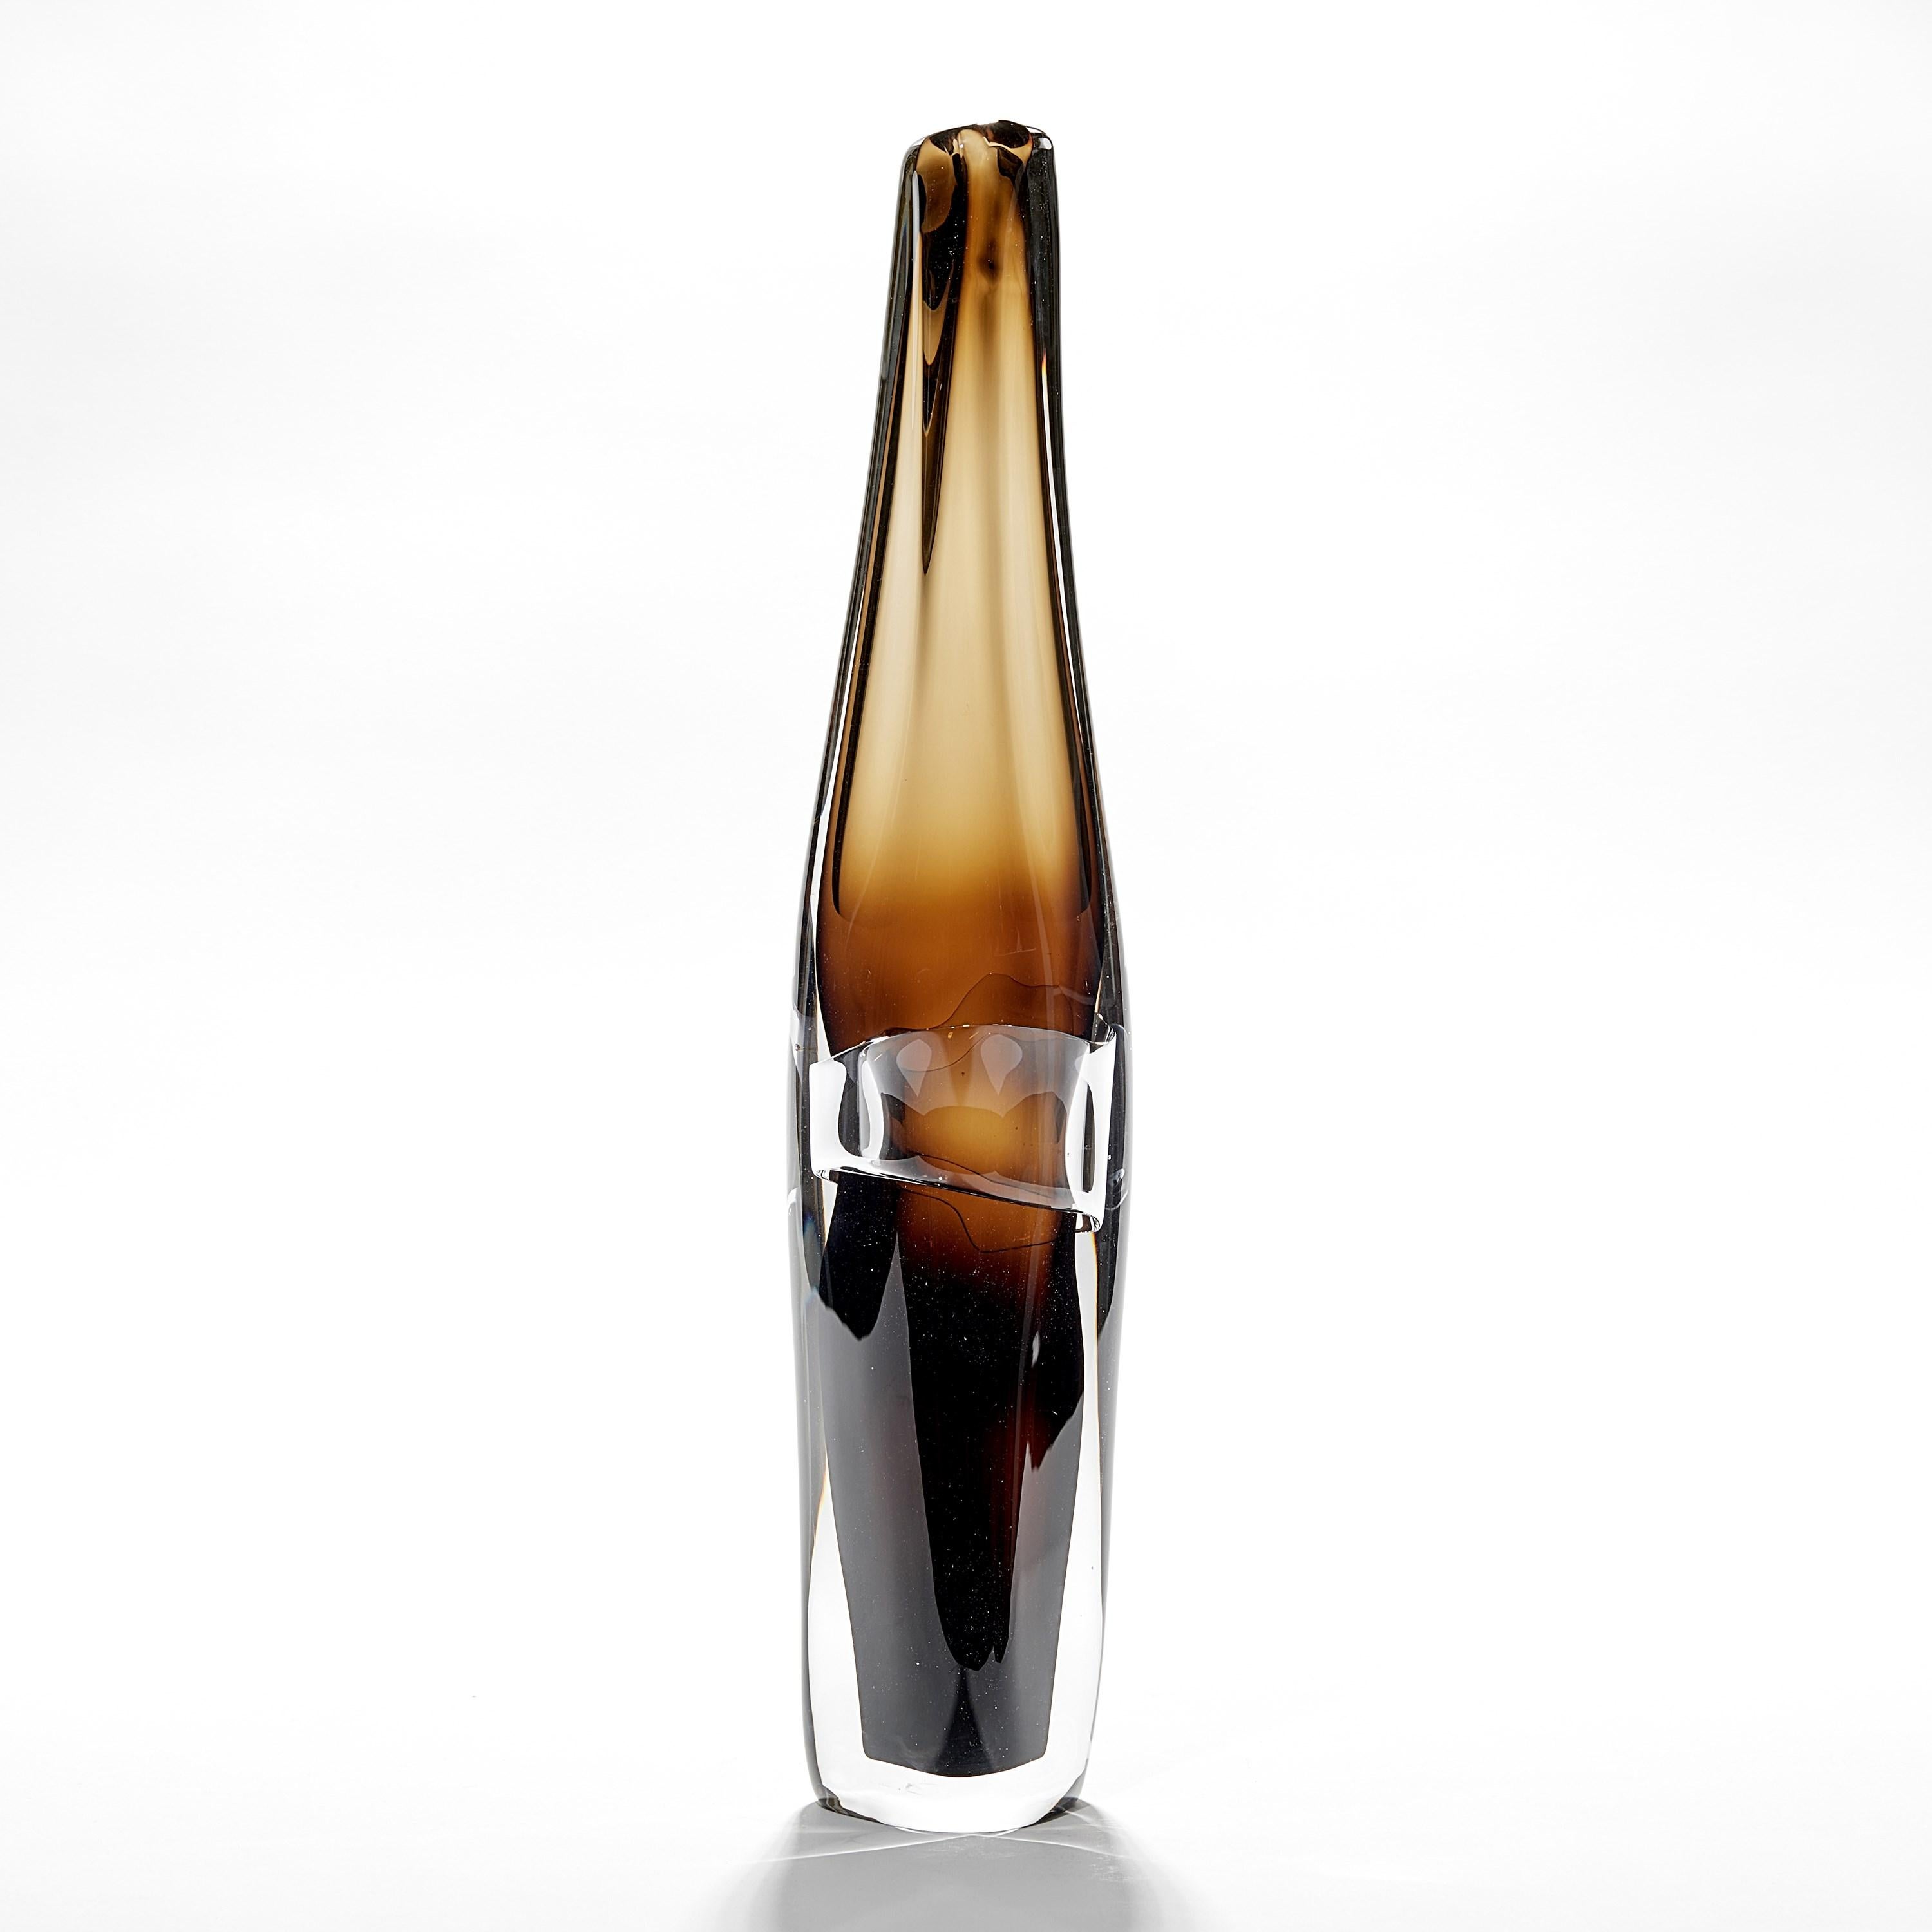 'Sommarial in gold brown' is a unique handblown sculptural glass vessel by the British artist, Vic Bamforth.

Bamforth is an artist who has helped to bring the highly demanding graal technique into the 21st century. He combines hand-painting and